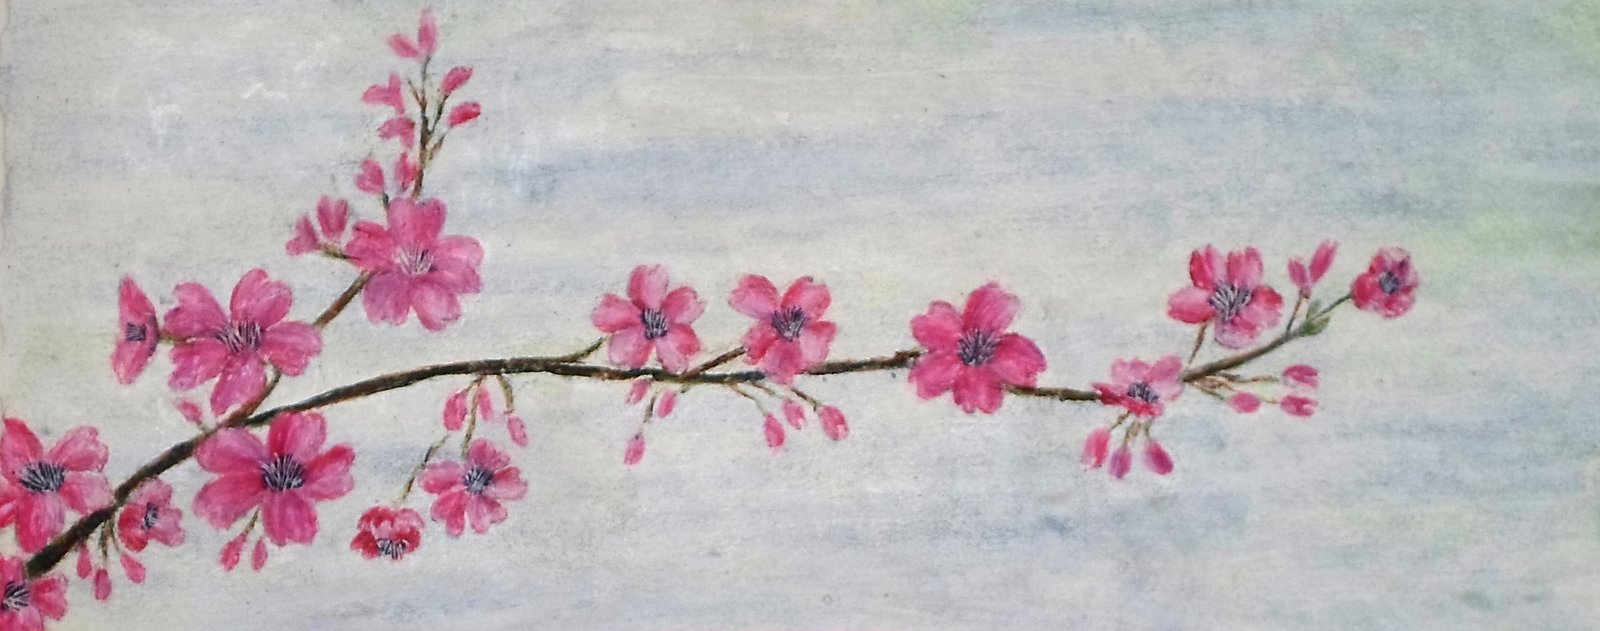 Cherry Blossoms - detail from Berries, Blossoms, Branches painting by contemporary Irish artist Mary Wallace